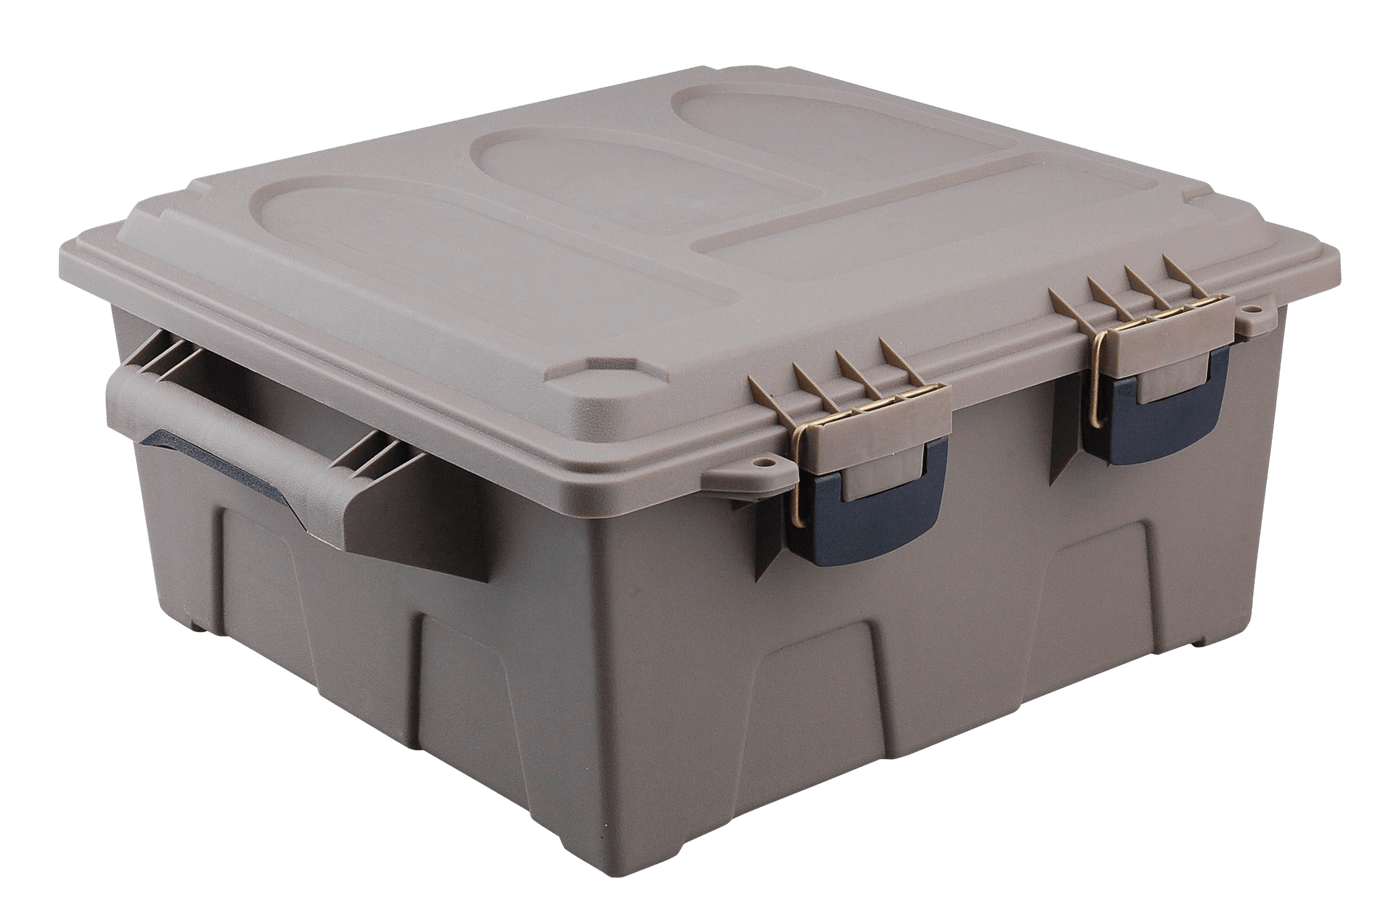 RANGER RUGGED GEAR Ranger Rugged Gear Ammo Crate, Reliant Rrg-10118     Ammo Crate Utility Box   Tan Shooting